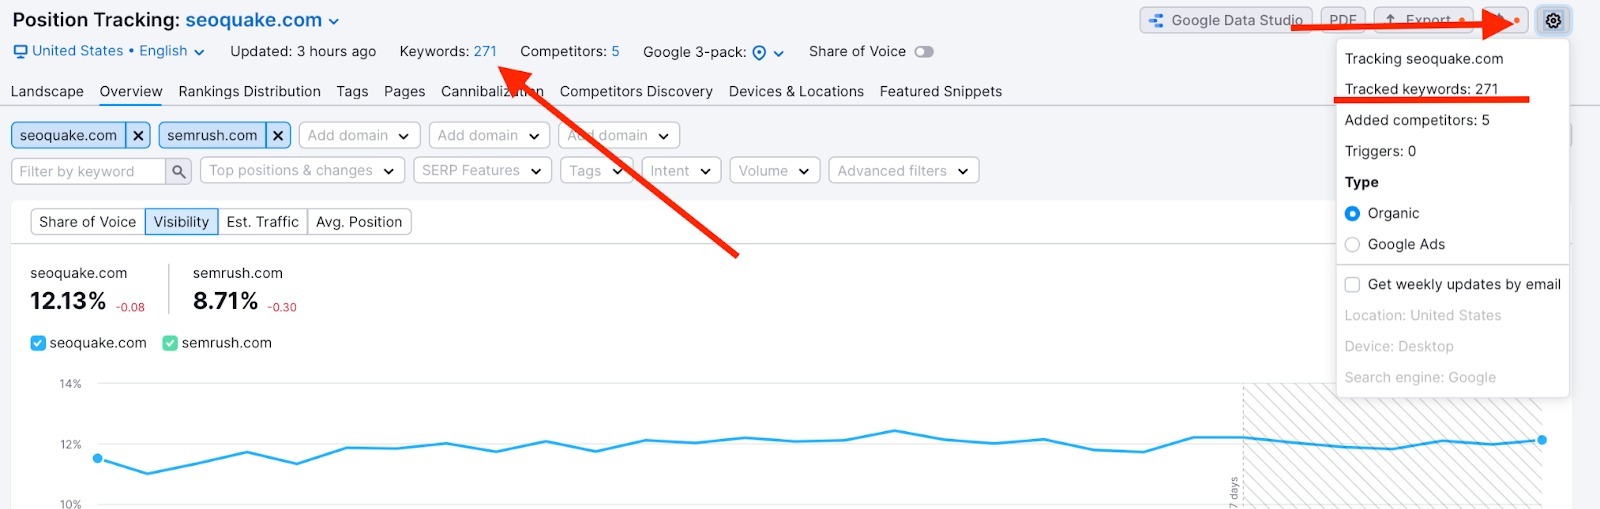 Connecting Position Tracking with Google Analytics image 4